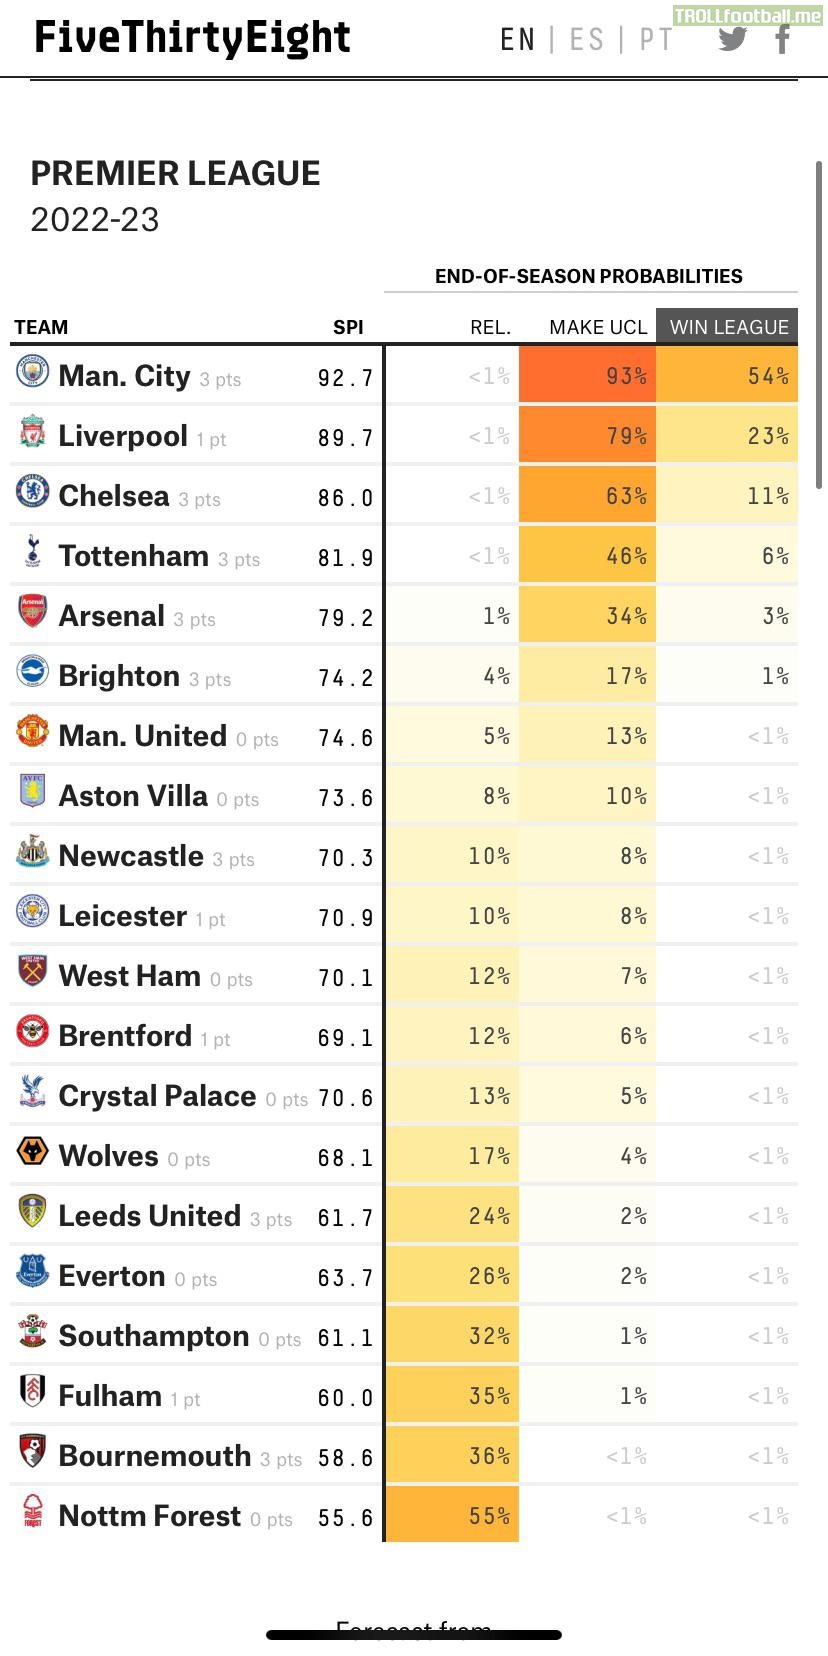 Brighton more likely to finish Top 4 than Manchester United after first matchday according to Fivethirtyeight